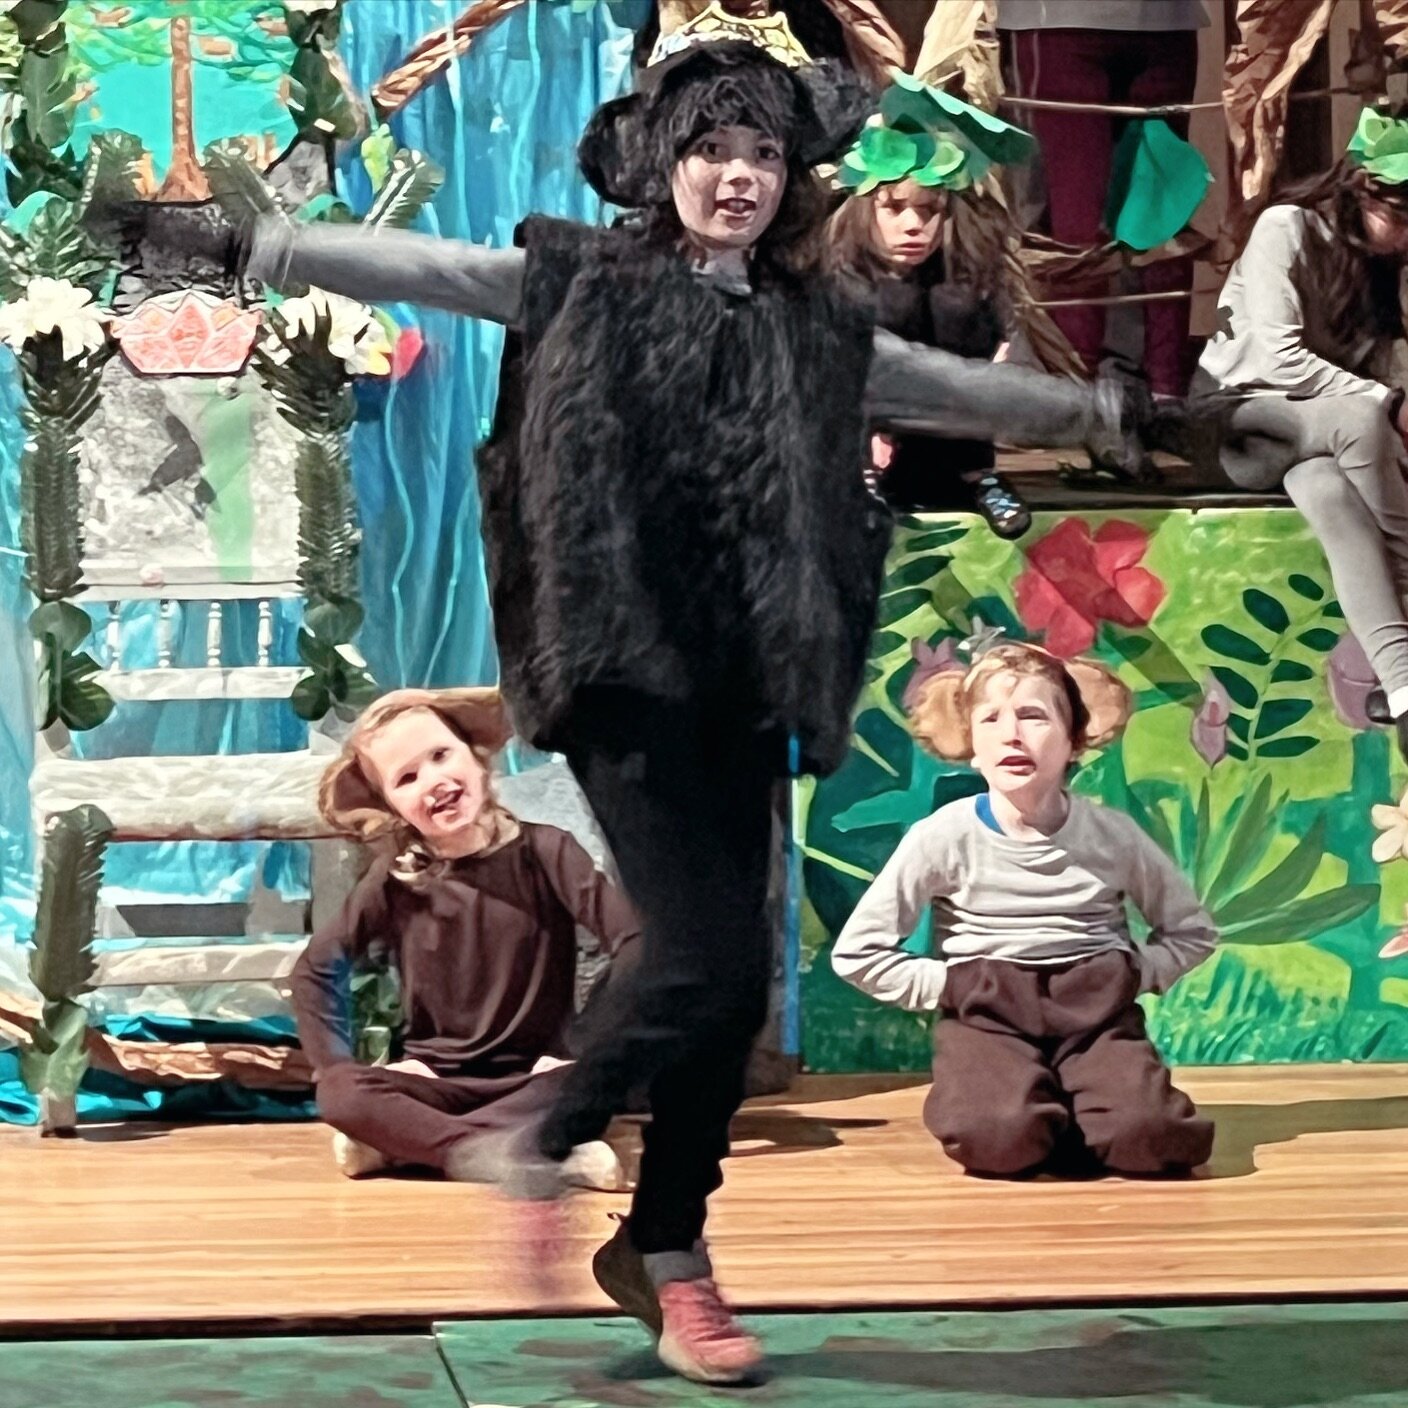 Jungle Book this weekend!  April 5-7!